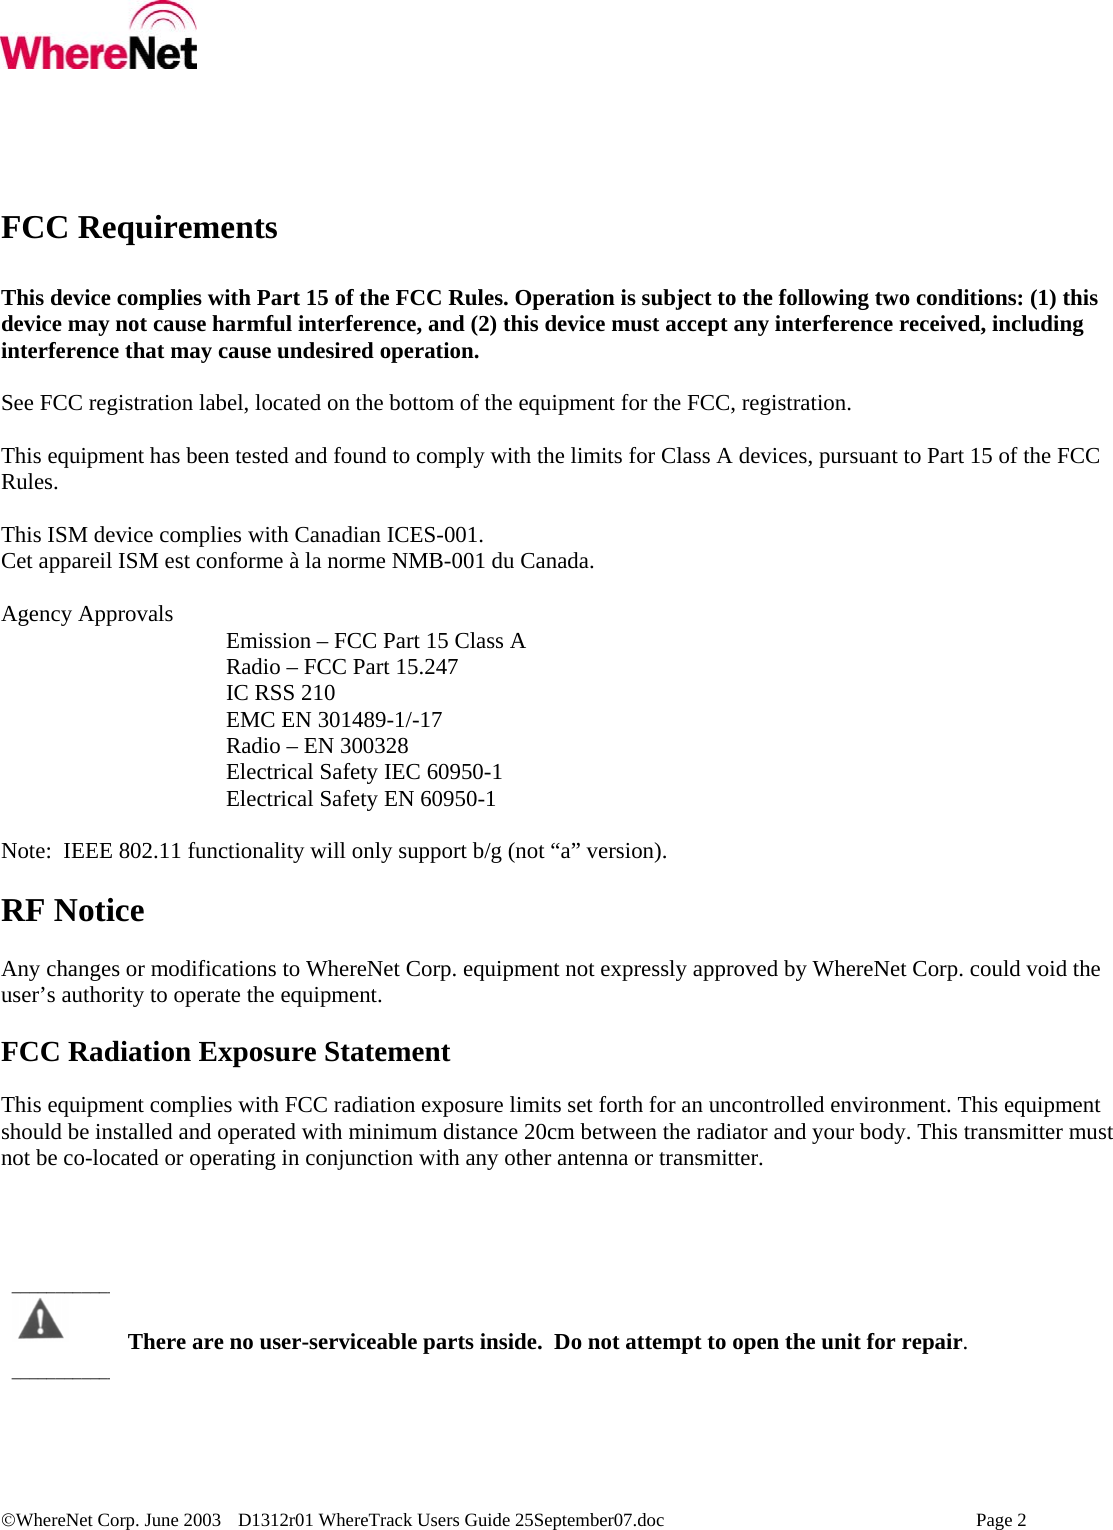  ©WhereNet Corp. June 2003  D1312r01 WhereTrack Users Guide 25September07.doc    Page 2  FCC Requirements  This device complies with Part 15 of the FCC Rules. Operation is subject to the following two conditions: (1) this device may not cause harmful interference, and (2) this device must accept any interference received, including interference that may cause undesired operation.  See FCC registration label, located on the bottom of the equipment for the FCC, registration.  This equipment has been tested and found to comply with the limits for Class A devices, pursuant to Part 15 of the FCC Rules.  This ISM device complies with Canadian ICES-001. Cet appareil ISM est conforme à la norme NMB-001 du Canada.  Agency Approvals   Emission – FCC Part 15 Class A       Radio – FCC Part 15.247    IC RSS 210       EMC EN 301489-1/-17    Radio – EN 300328 Electrical Safety IEC 60950-1    Electrical Safety EN 60950-1  Note:  IEEE 802.11 functionality will only support b/g (not “a” version).  RF Notice  Any changes or modifications to WhereNet Corp. equipment not expressly approved by WhereNet Corp. could void the user’s authority to operate the equipment.  FCC Radiation Exposure Statement  This equipment complies with FCC radiation exposure limits set forth for an uncontrolled environment. This equipment should be installed and operated with minimum distance 20cm between the radiator and your body. This transmitter must not be co-located or operating in conjunction with any other antenna or transmitter.       There are no user-serviceable parts inside.  Do not attempt to open the unit for repair. ________________________